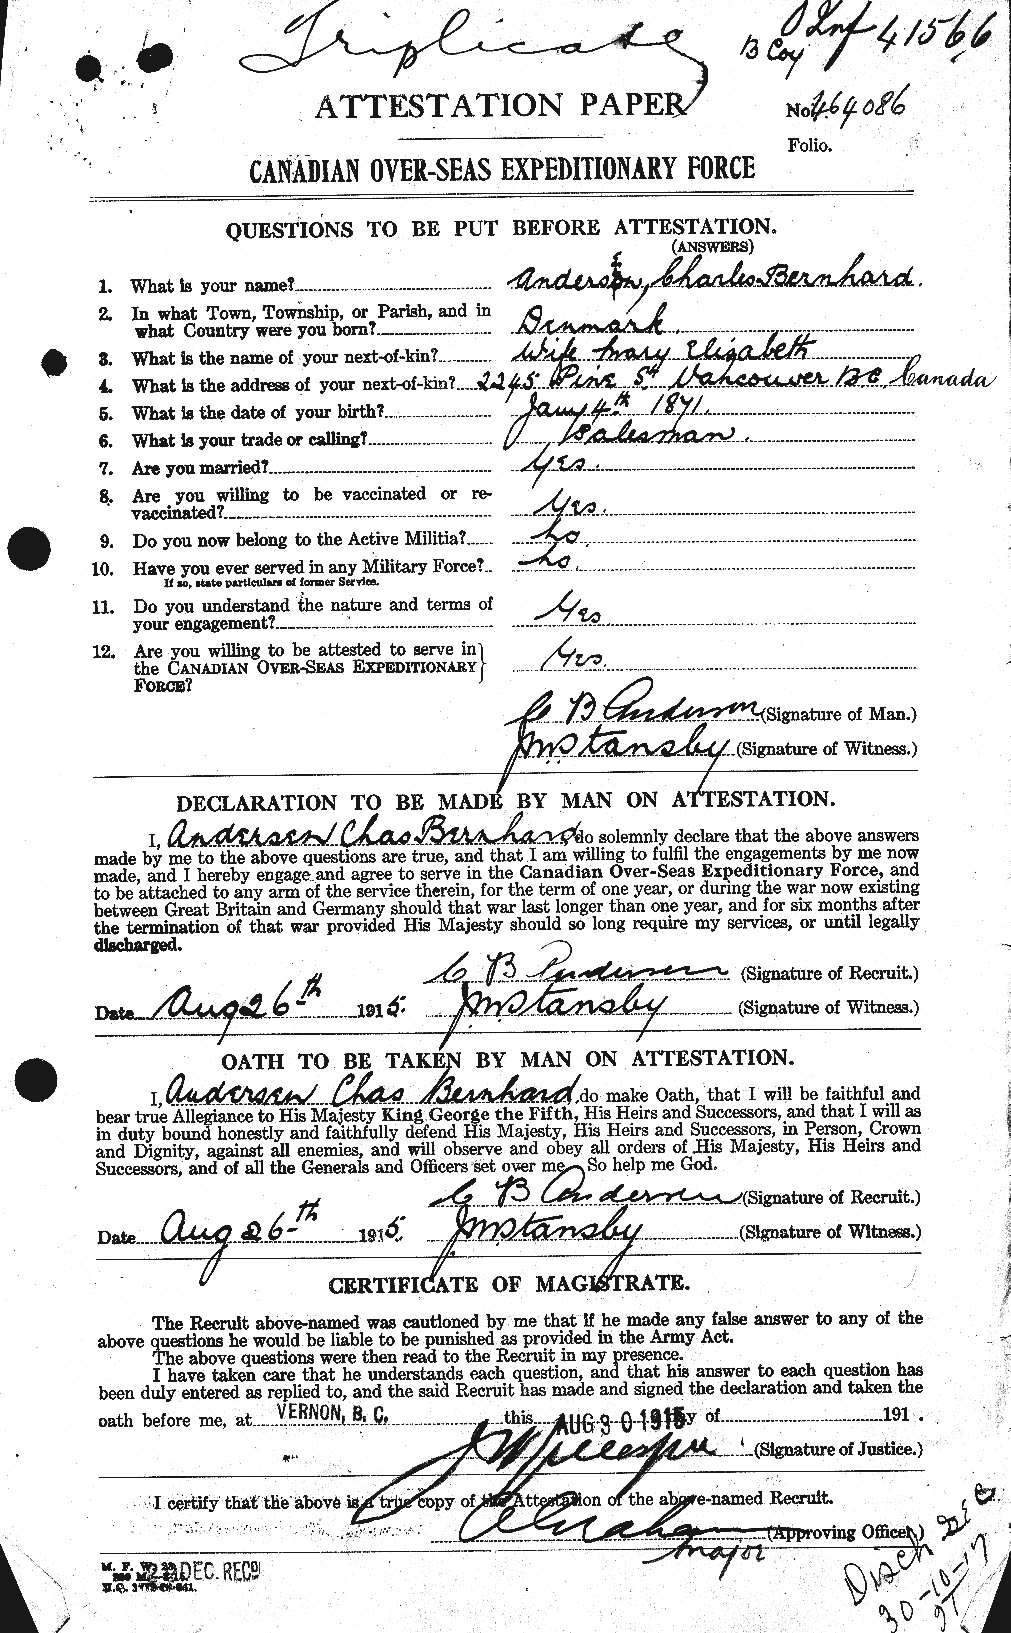 Personnel Records of the First World War - CEF 209594a